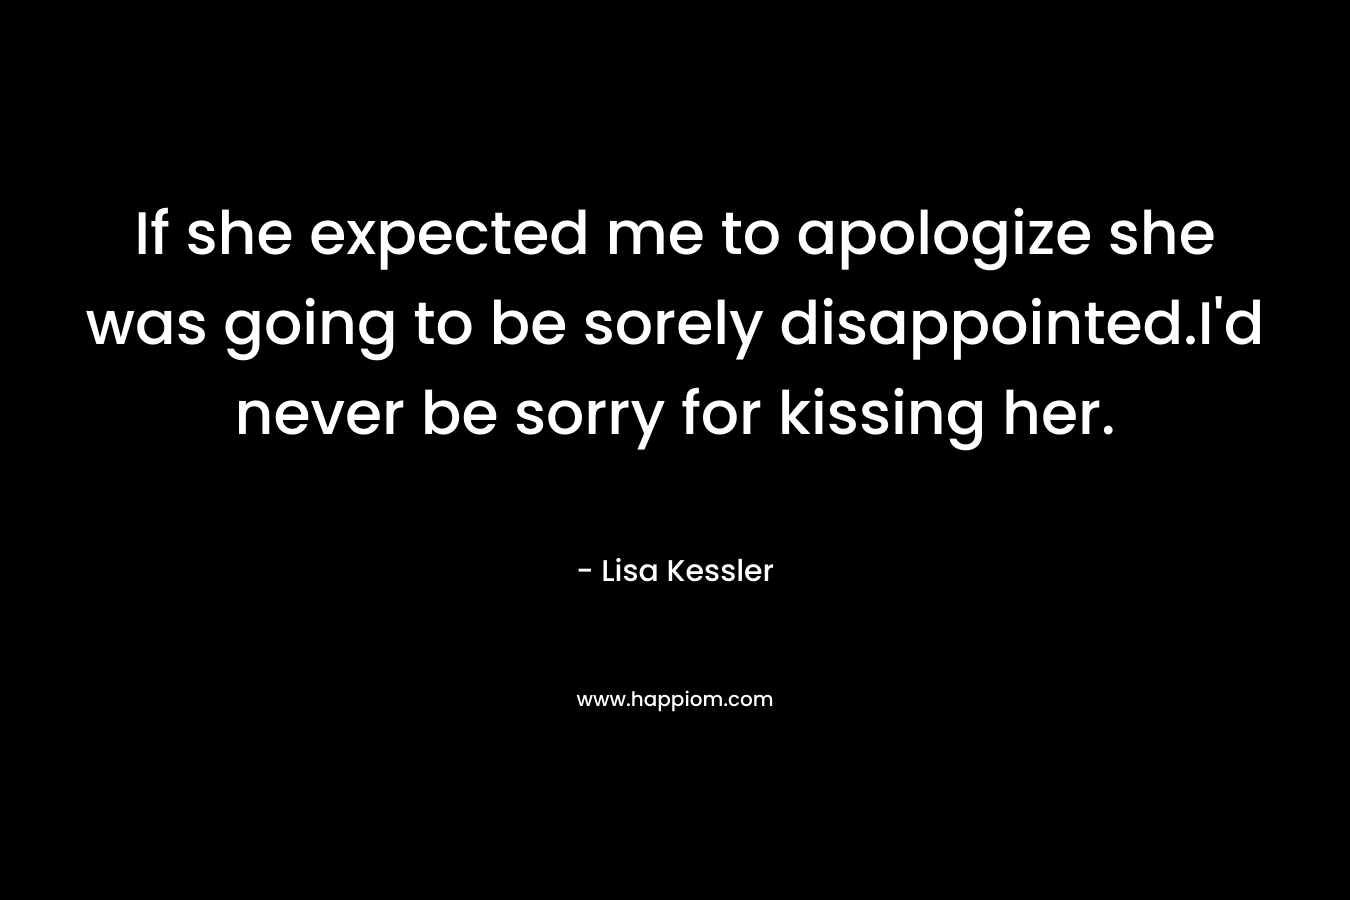 If she expected me to apologize she was going to be sorely disappointed.I’d never be sorry for kissing her. – Lisa Kessler